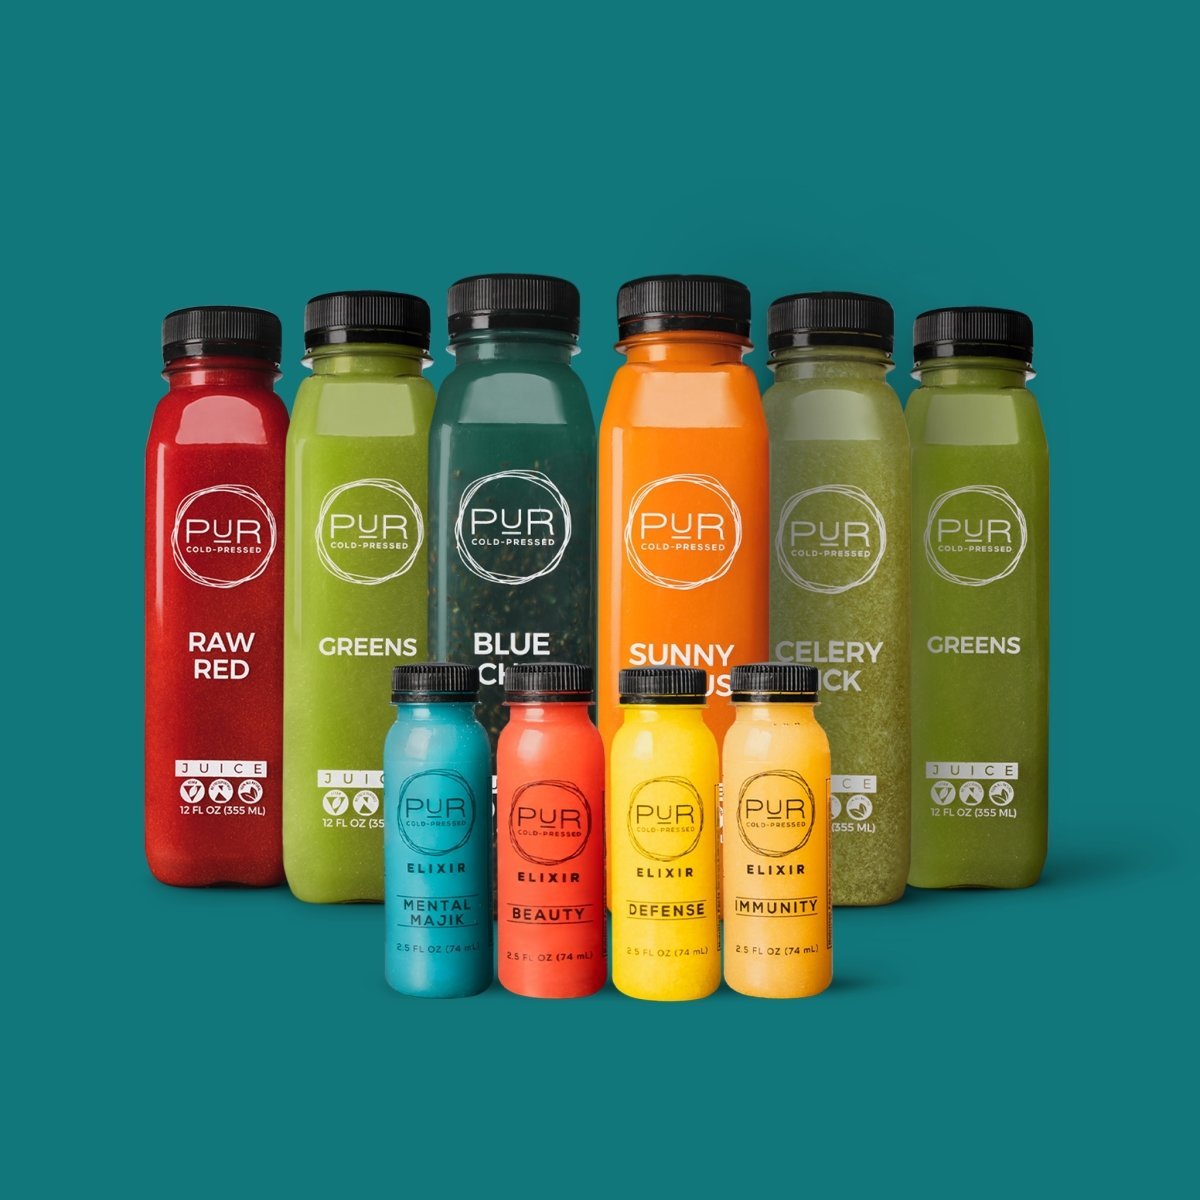 PUR Cold Pressed Juice Ultimate Juice Cleanse & Wellness Juice Shots - PUR Cold Pressed Juice - All - All Fruits & Veggies - Assist Weight Loss - Cleanse